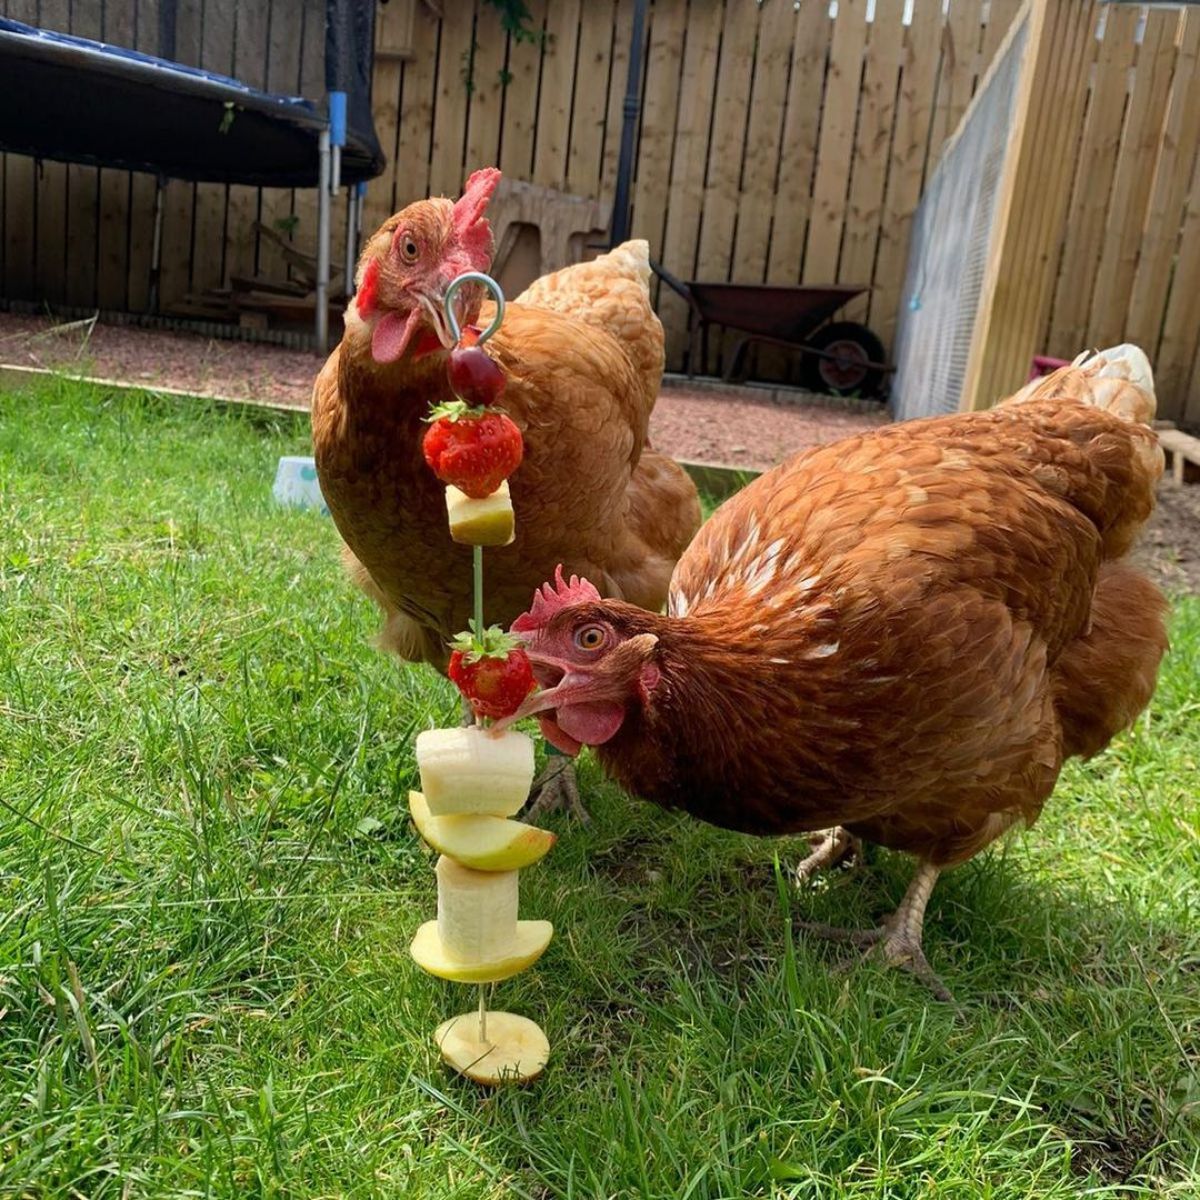 Two adorable Lohmann Brown hens feasting on a fruit treat.